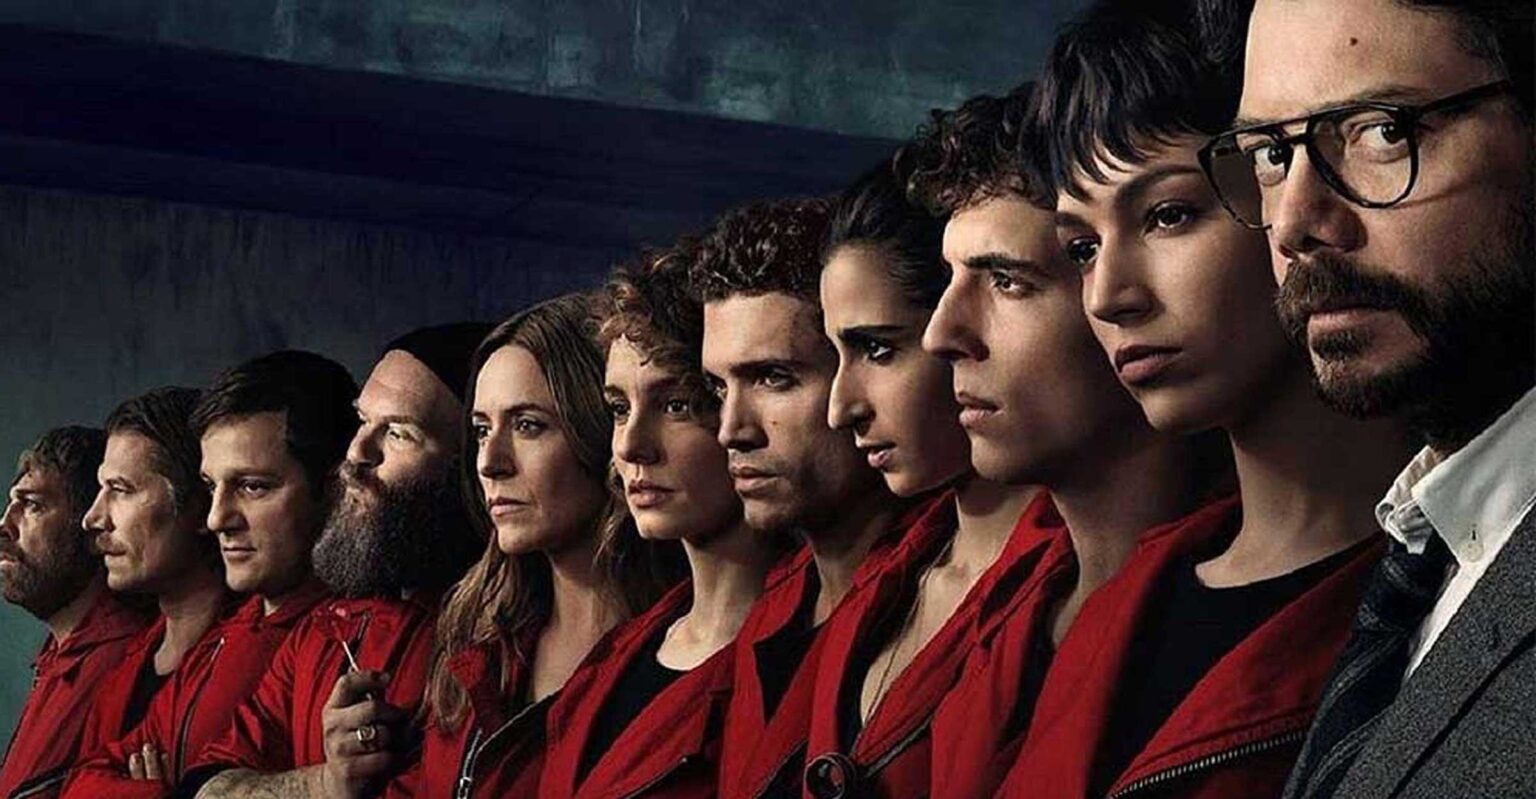 'Money Heist' is great at pulling crazy surprises. Here are quotes that convince us Tatiana and Alicia from 'Money Heist' are the same.